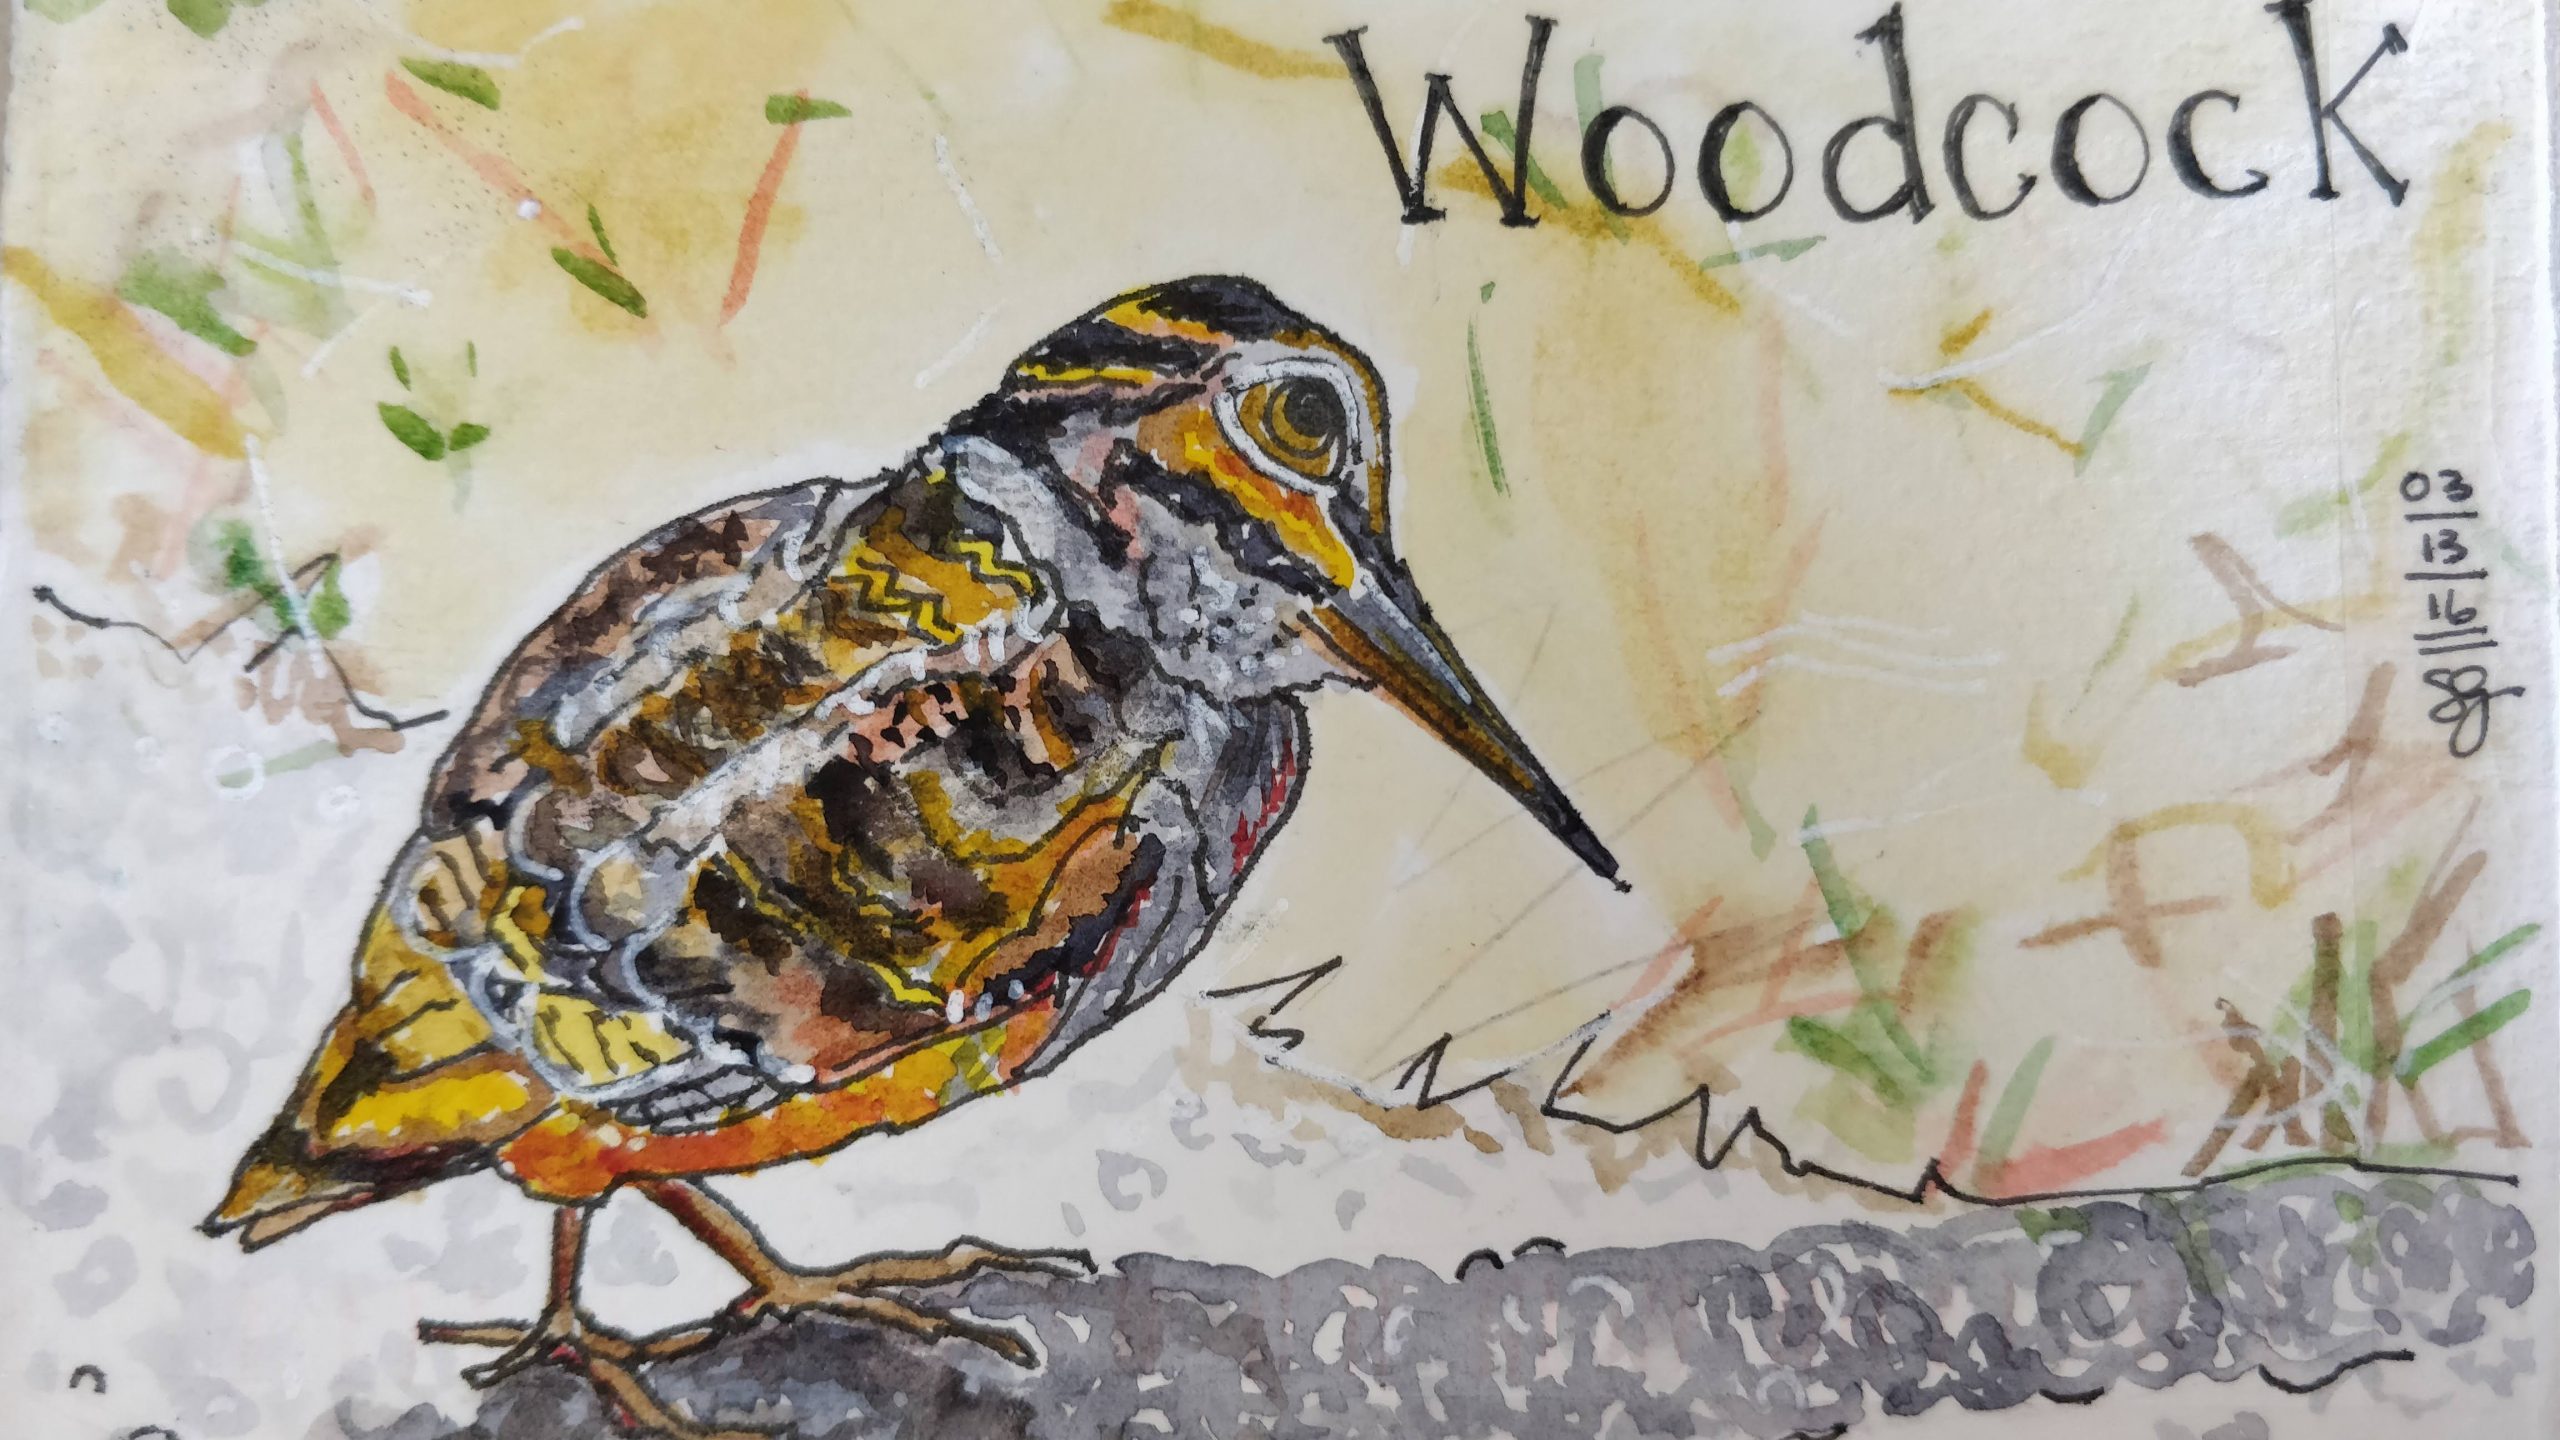 What Does the Woodcock Say?